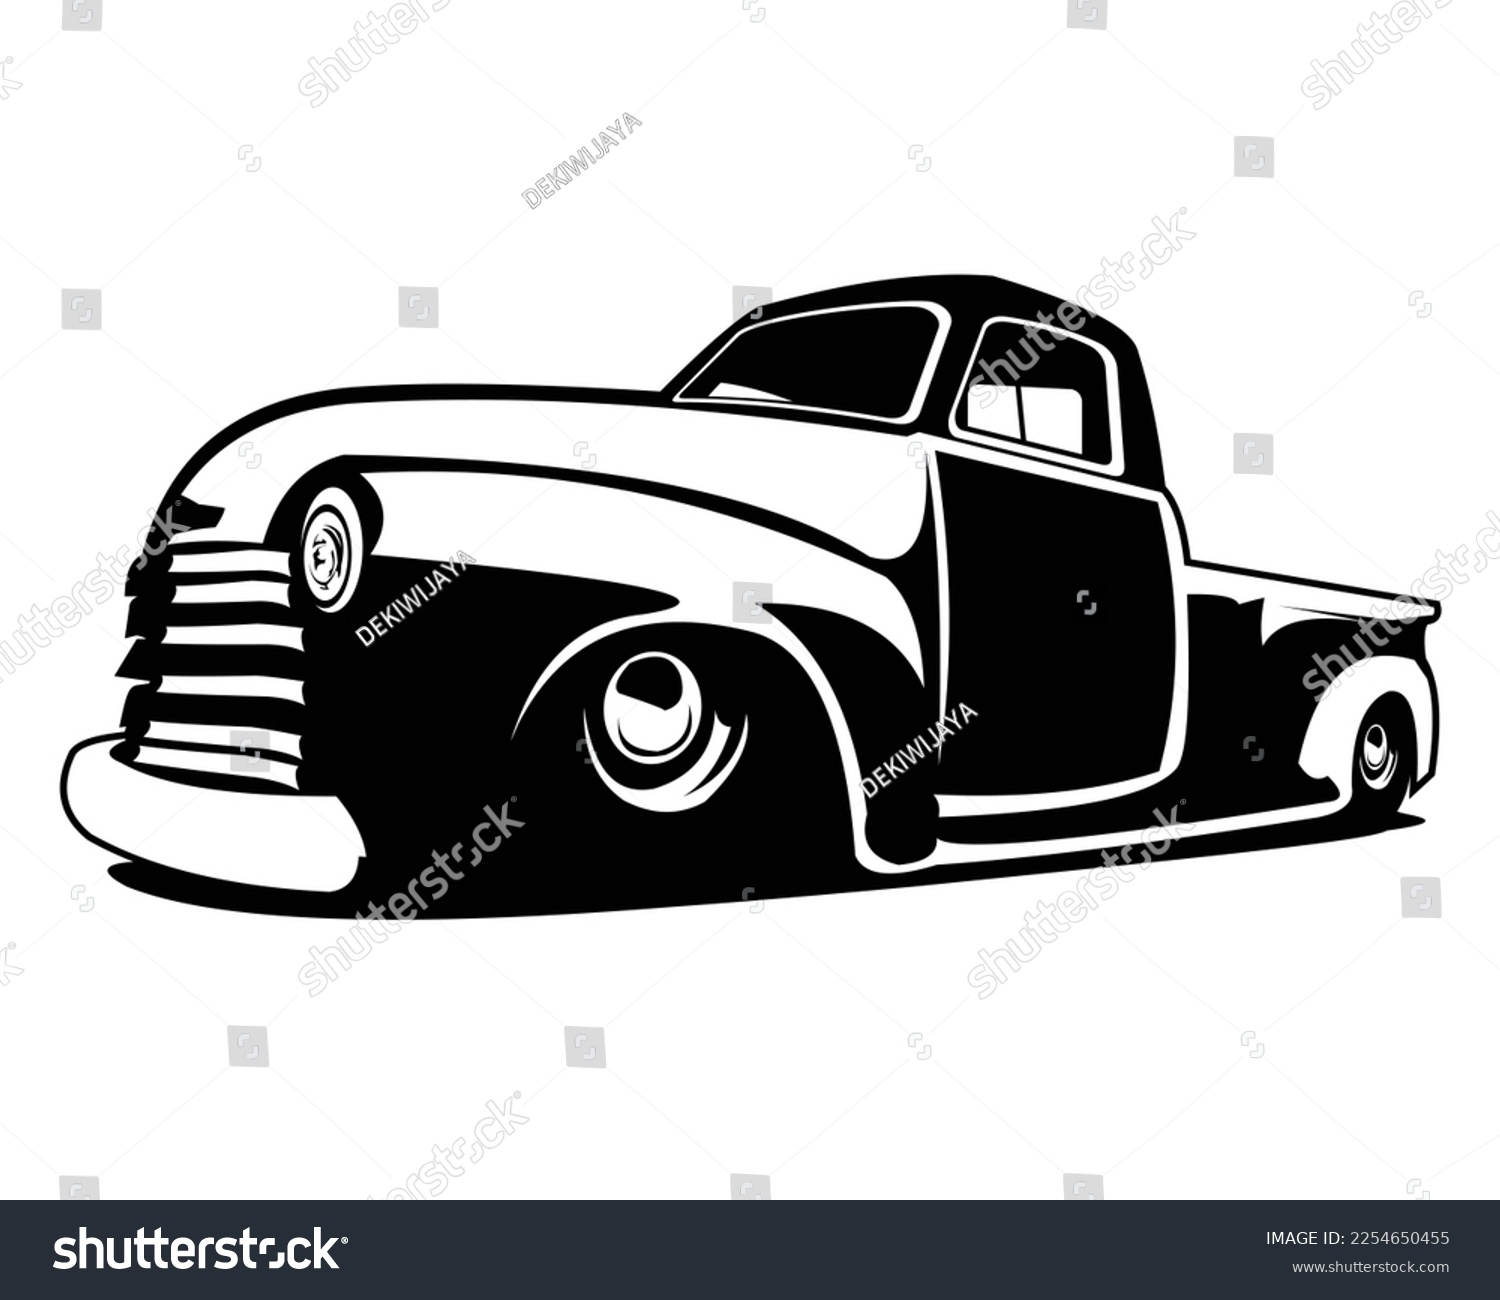 SVG of truck 3100. vector isolated. Best for badge, emblem, icon, sticker design, trucking industry. available eps 10. svg